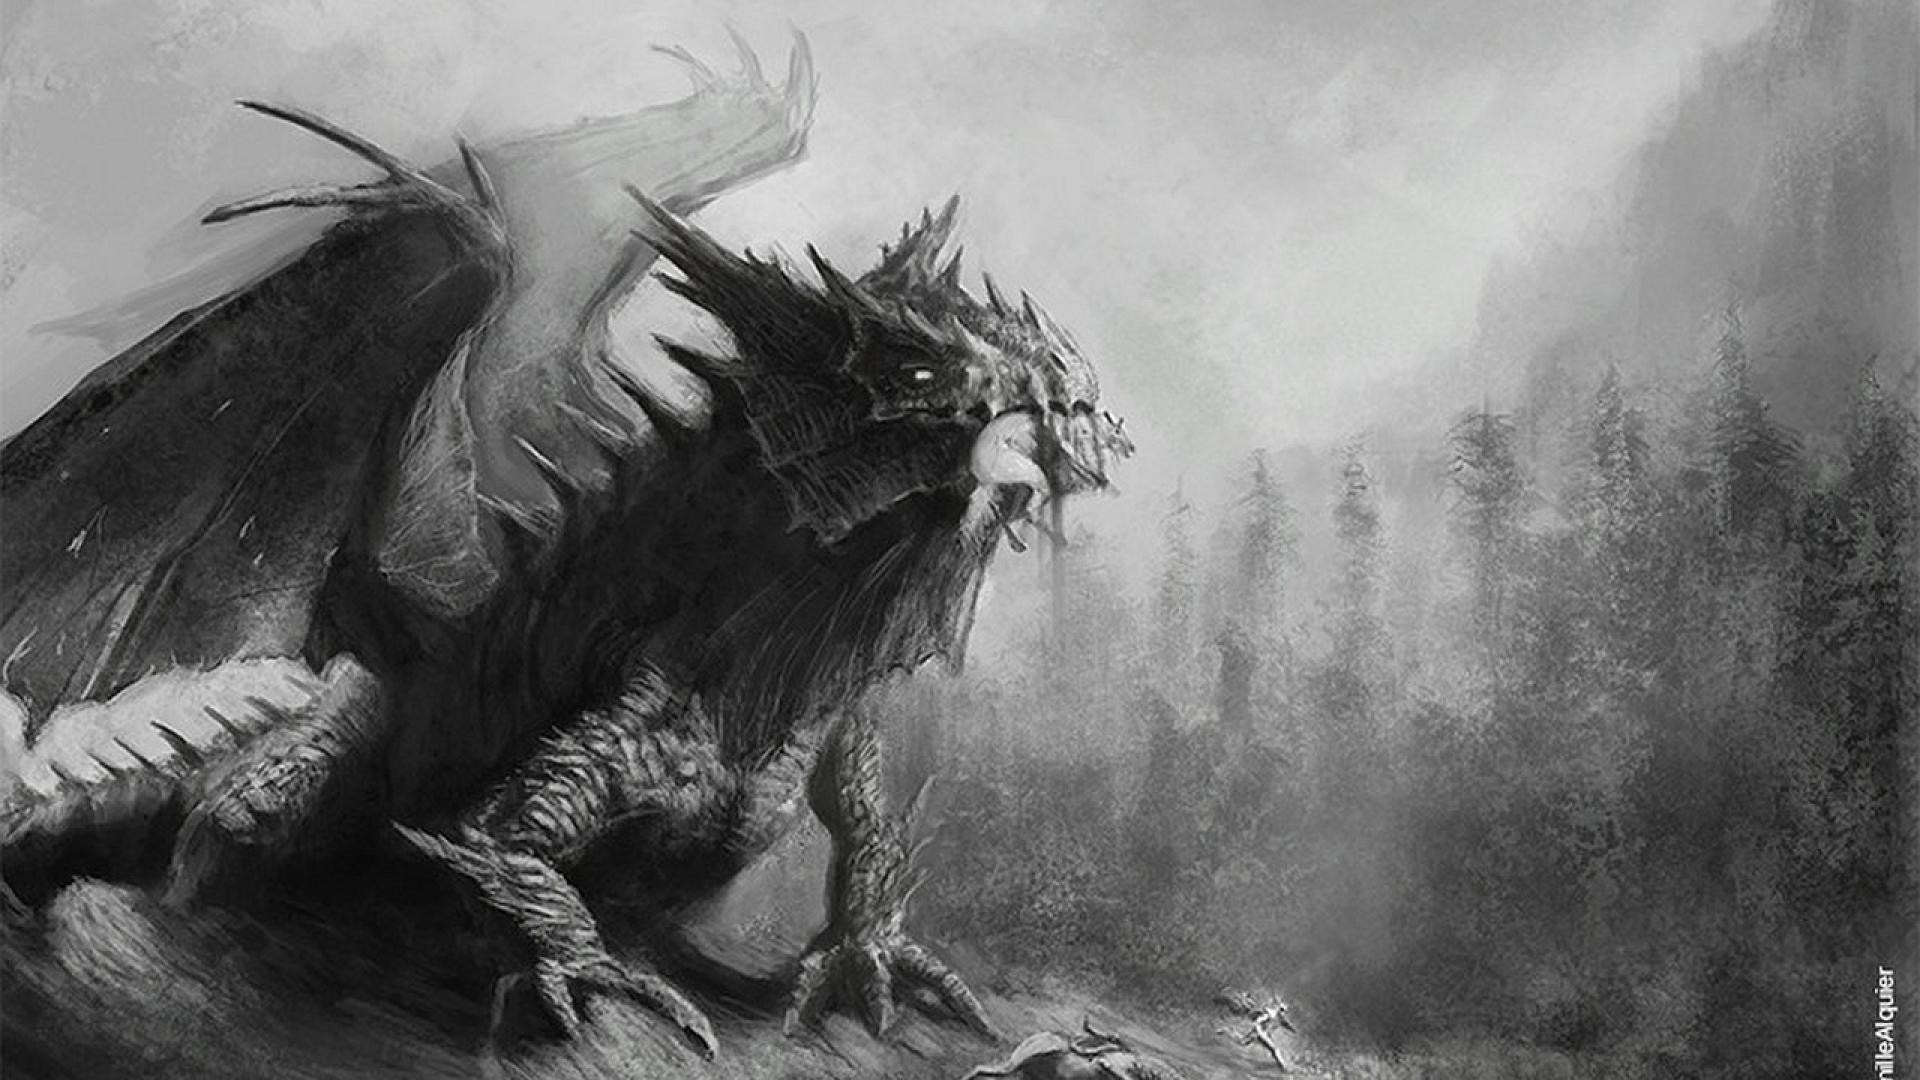 1920x1080 Black and white dragons forests fantasy art drawings wallpaper #fantasy -  See more Character Designs